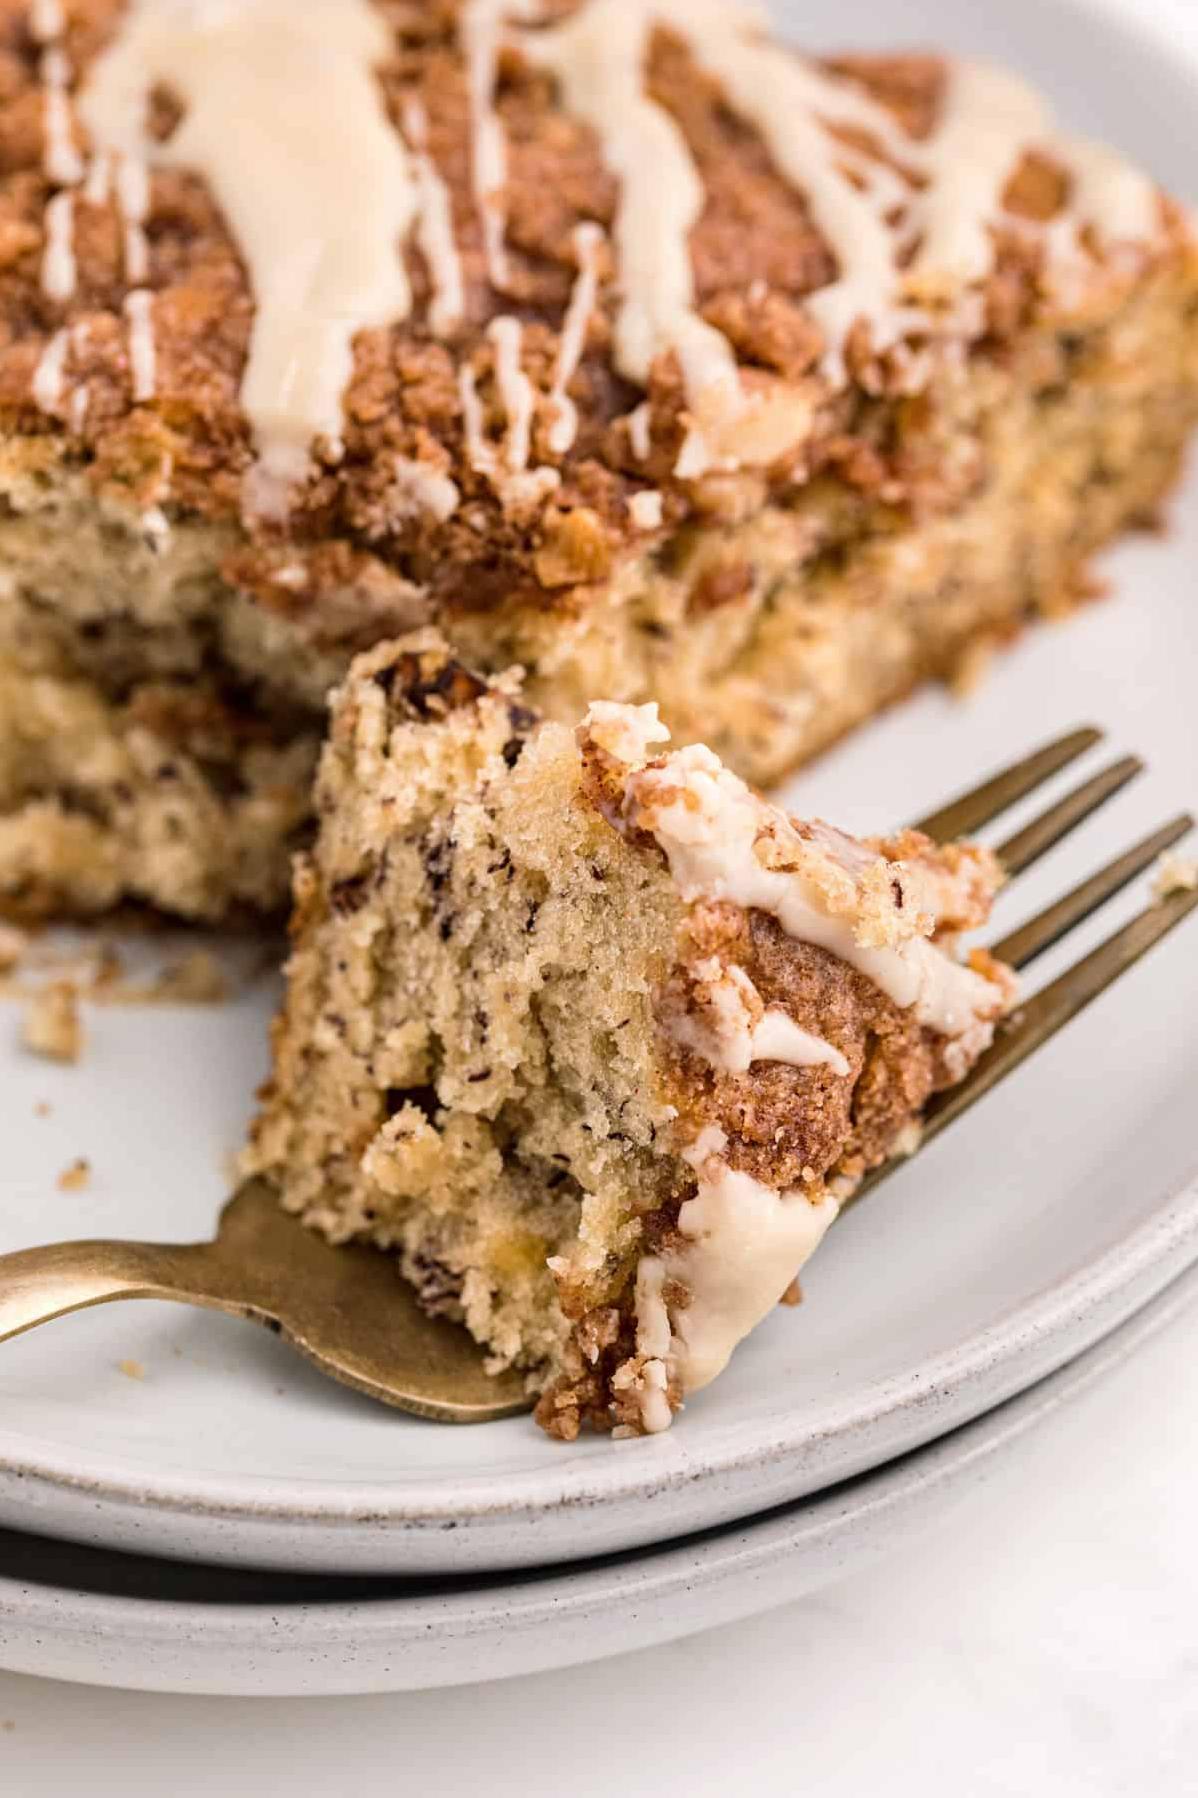  A coffee cake so good, you'll want it for dessert too